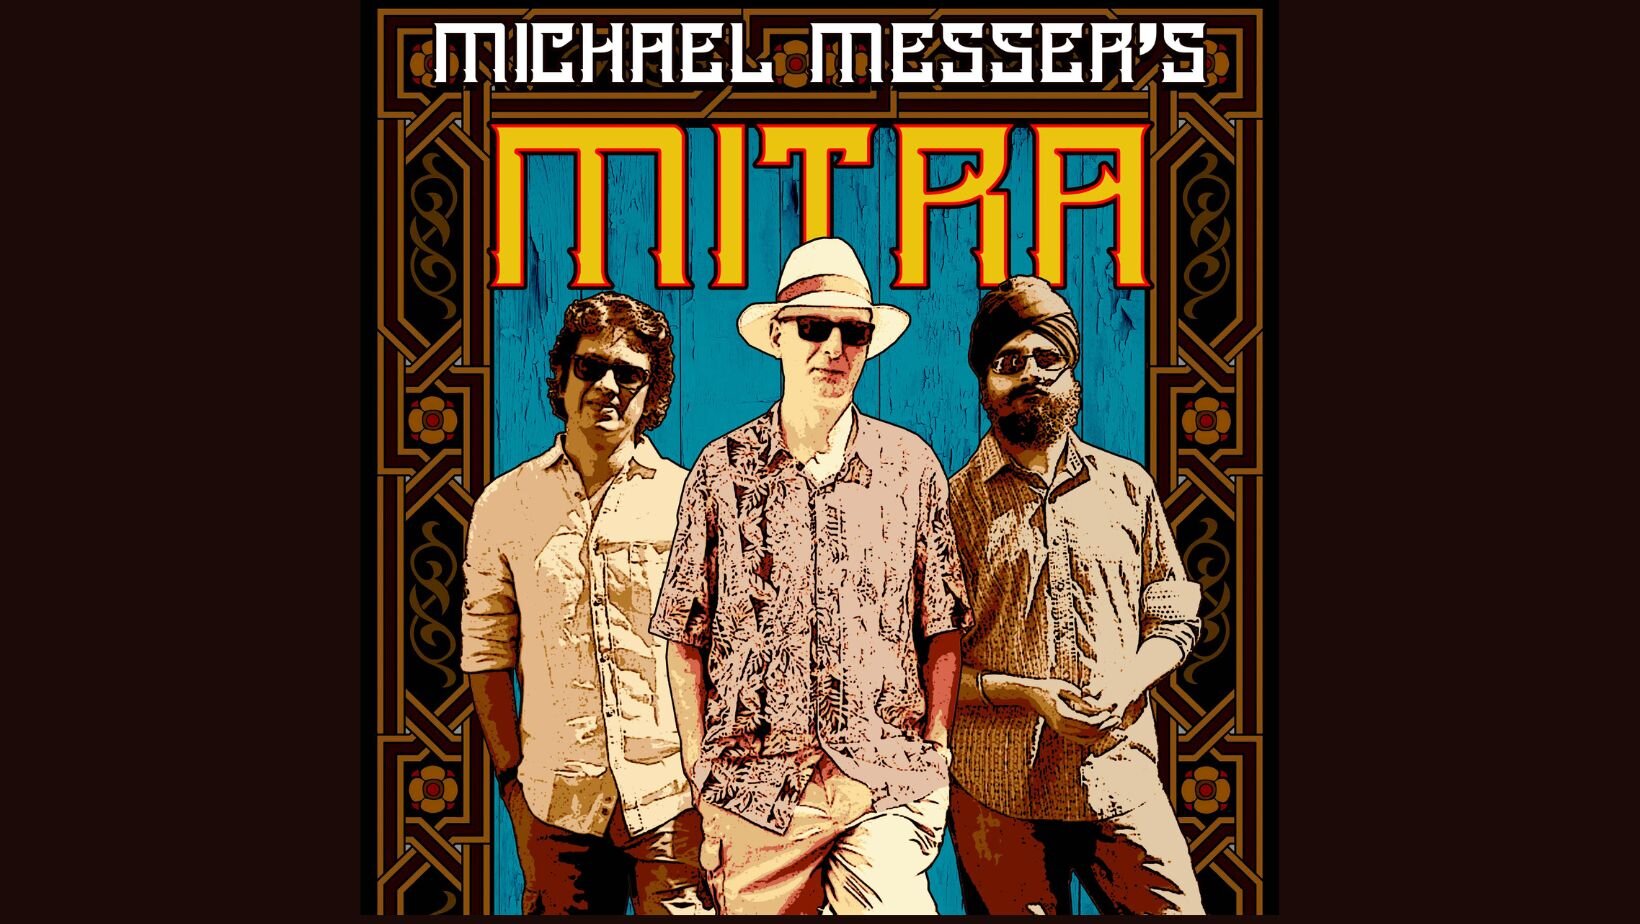 The Songbook Sessions presents Michael Messer’s Mitra